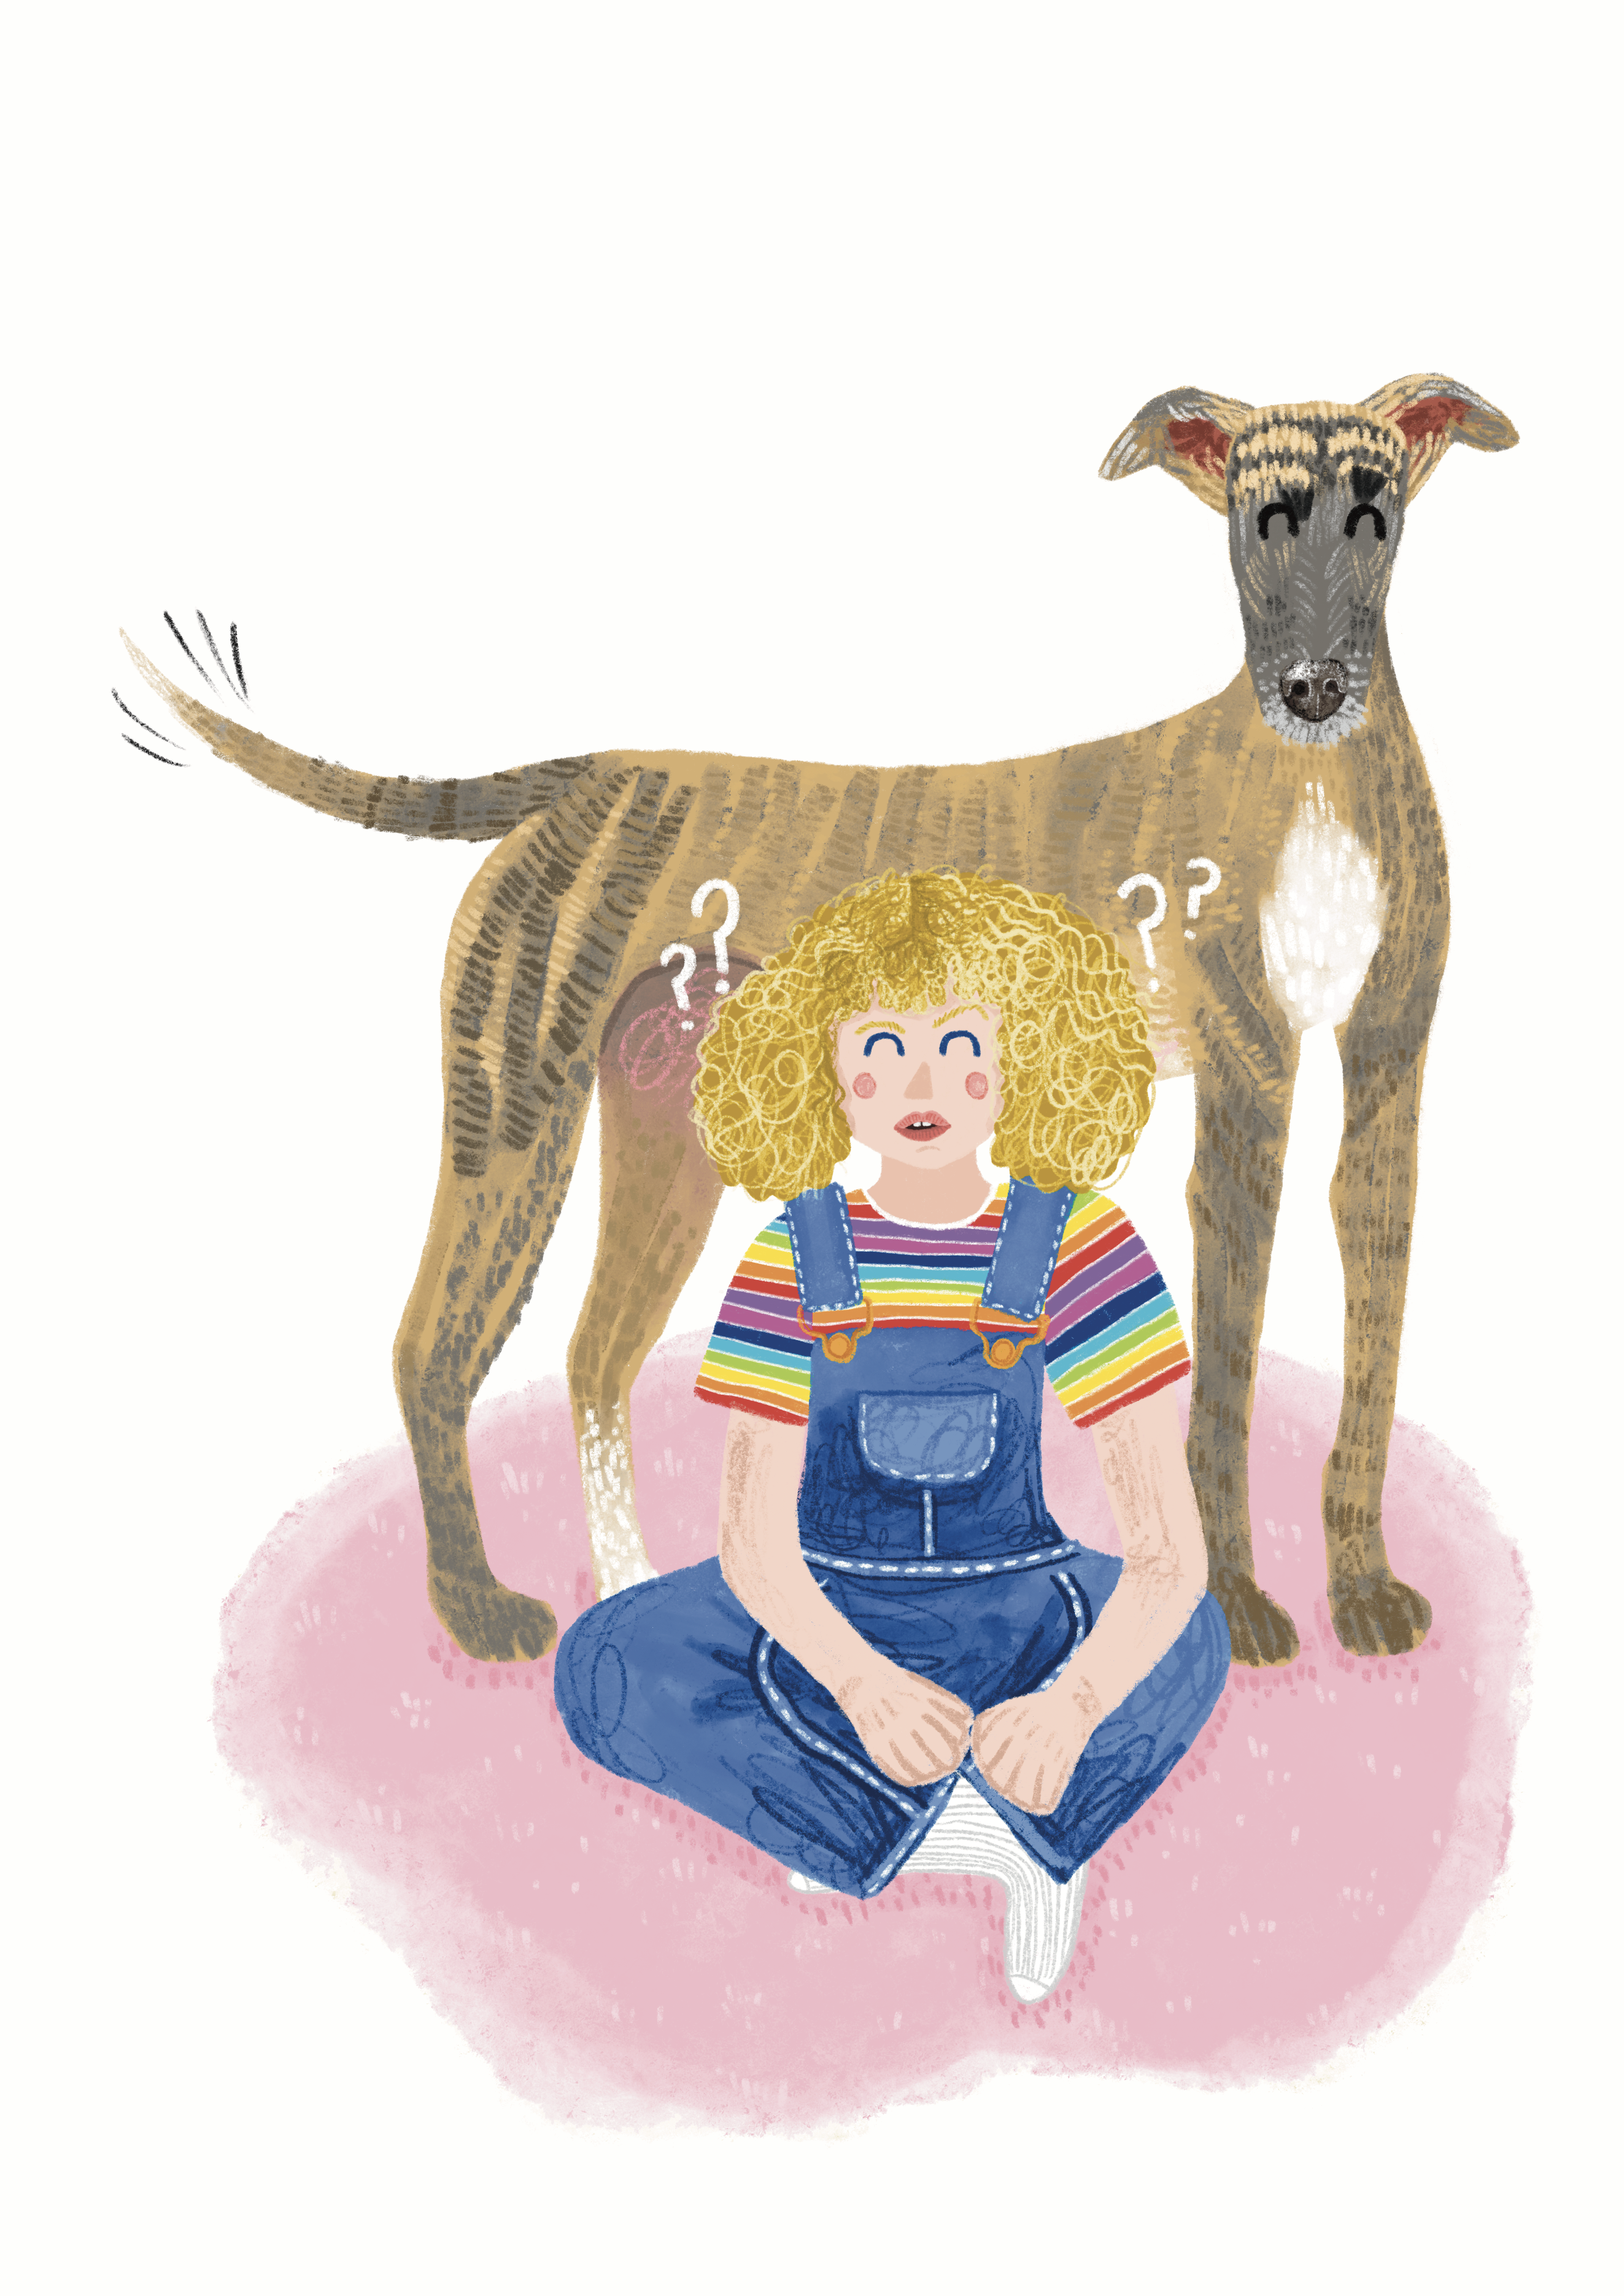 An illustration done by Hope Bullen with a brindle sighthound shown wagging it's tail and eyebrow raised behind a young girl with curly blonde hair in a rainbow top and denim dungarees. They're sat on a pink floor.